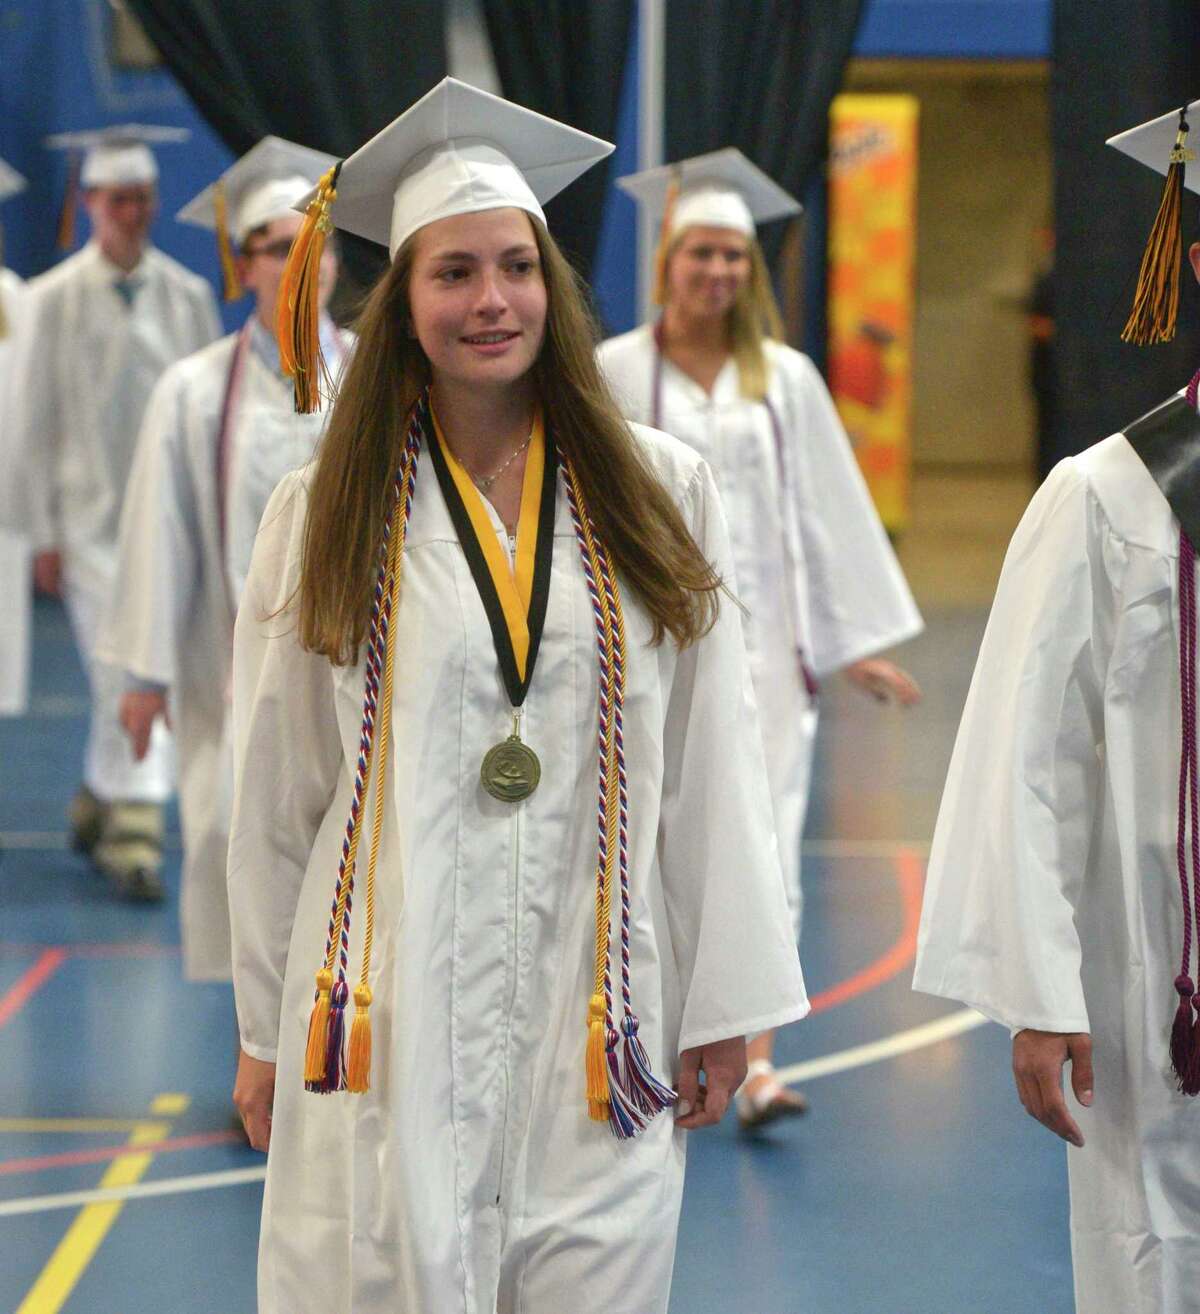 Joel Barlow High School 2019 Commencement Ceremony, Wednesday June 12, 2019, at The O'Neill Center at Western Connecticut State University, Danbury, Conn.